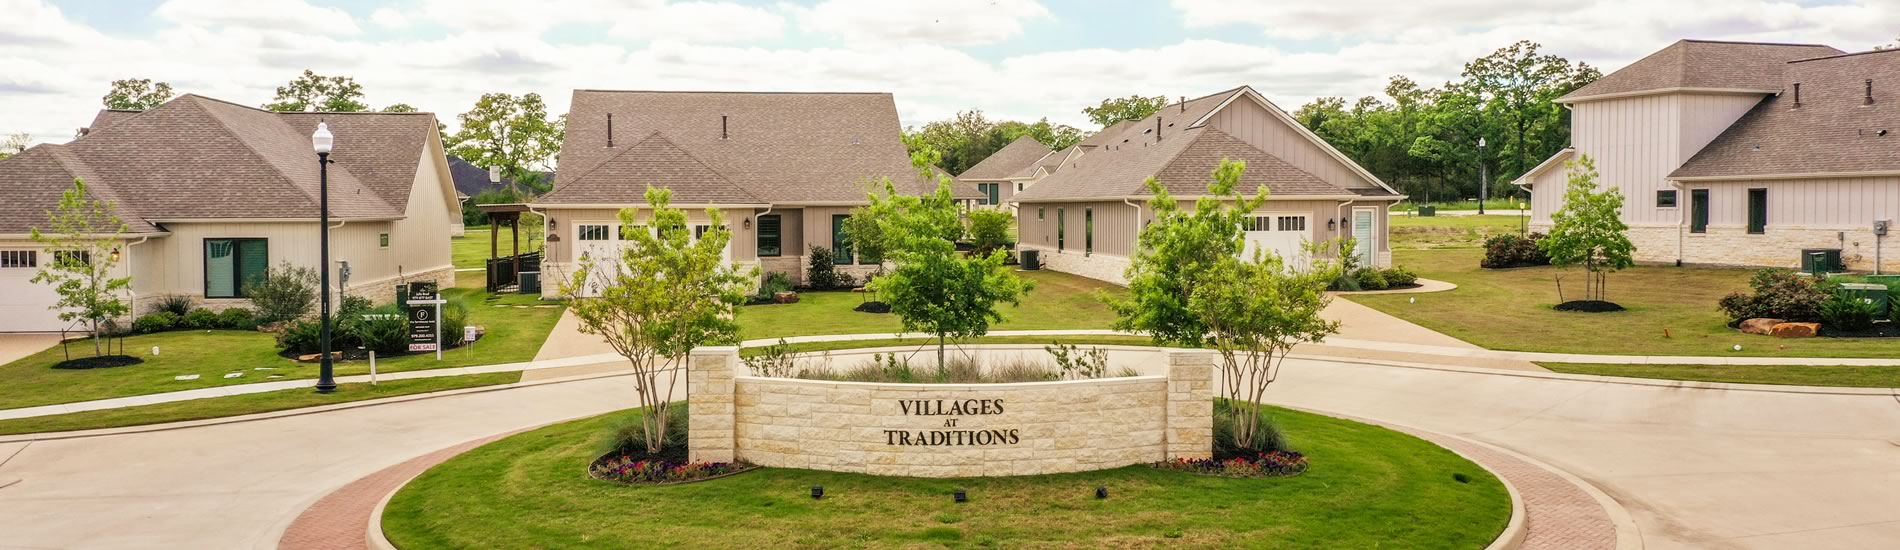 The Village at Traditions sub division HOA